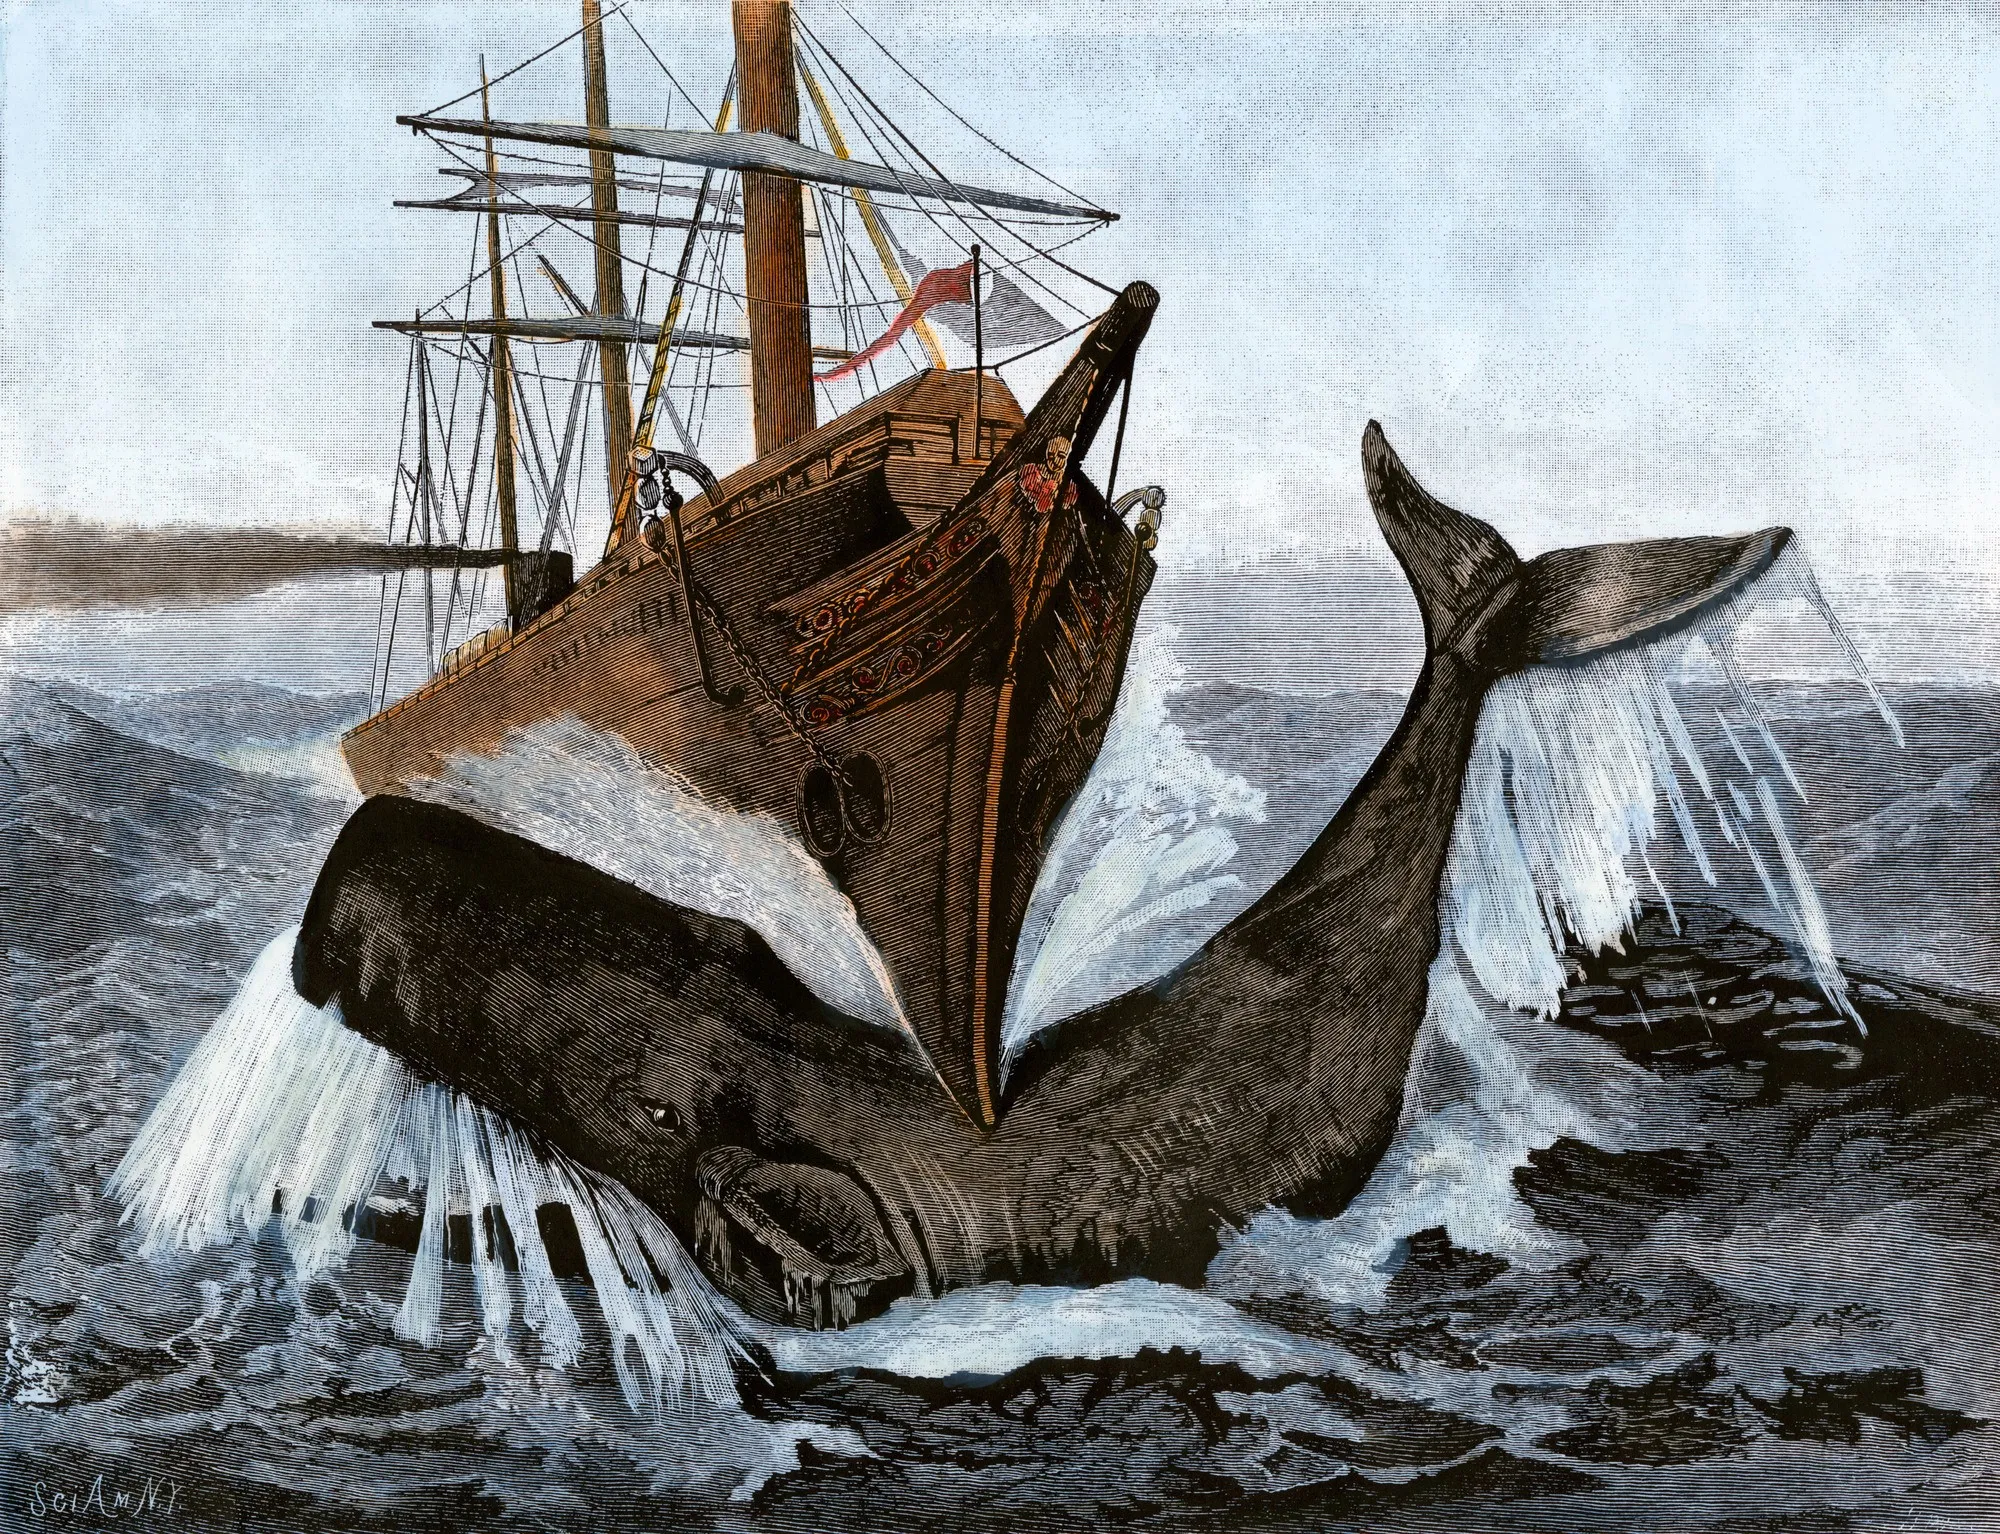 Bow of the ship Essex after striking a whale, 1820.